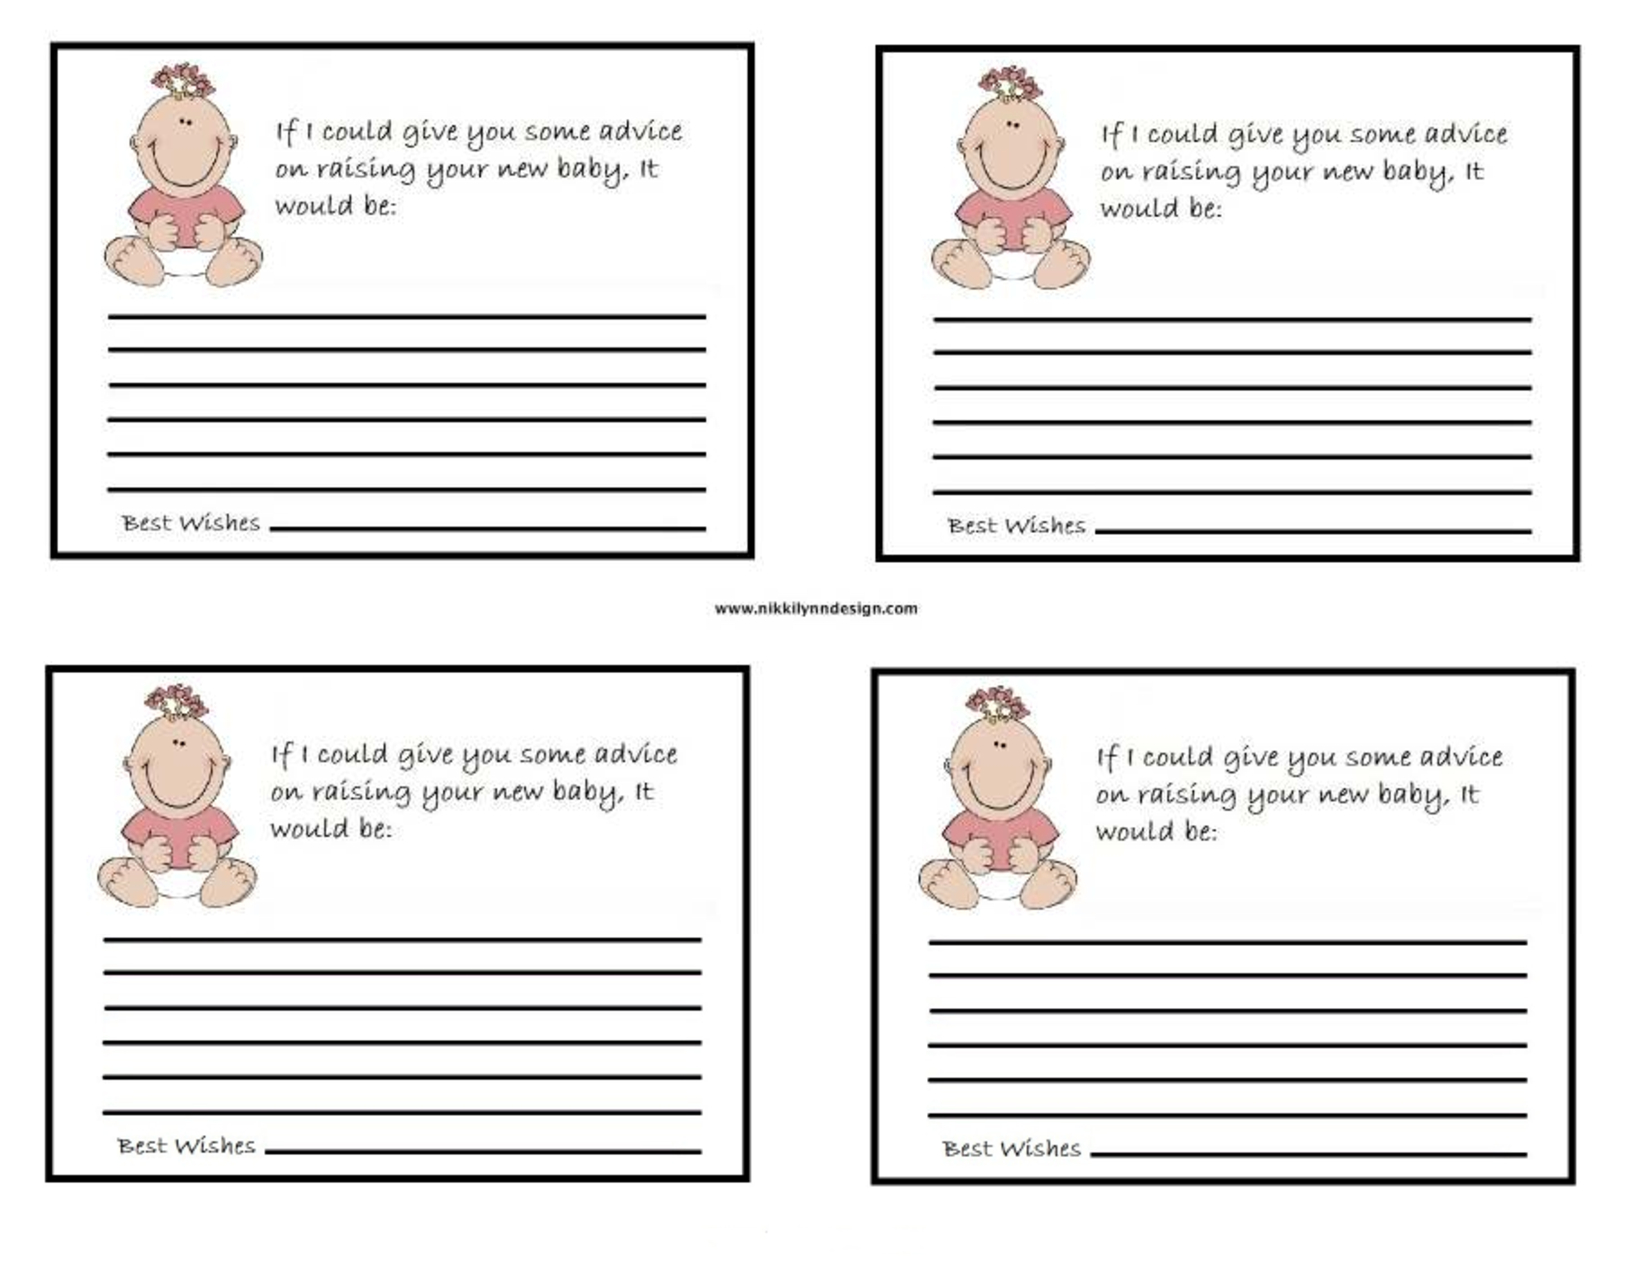 Baby Shower Games Free Printable Worksheets. Free Printable Baby - Free Printable Baby Shower Advice Cards